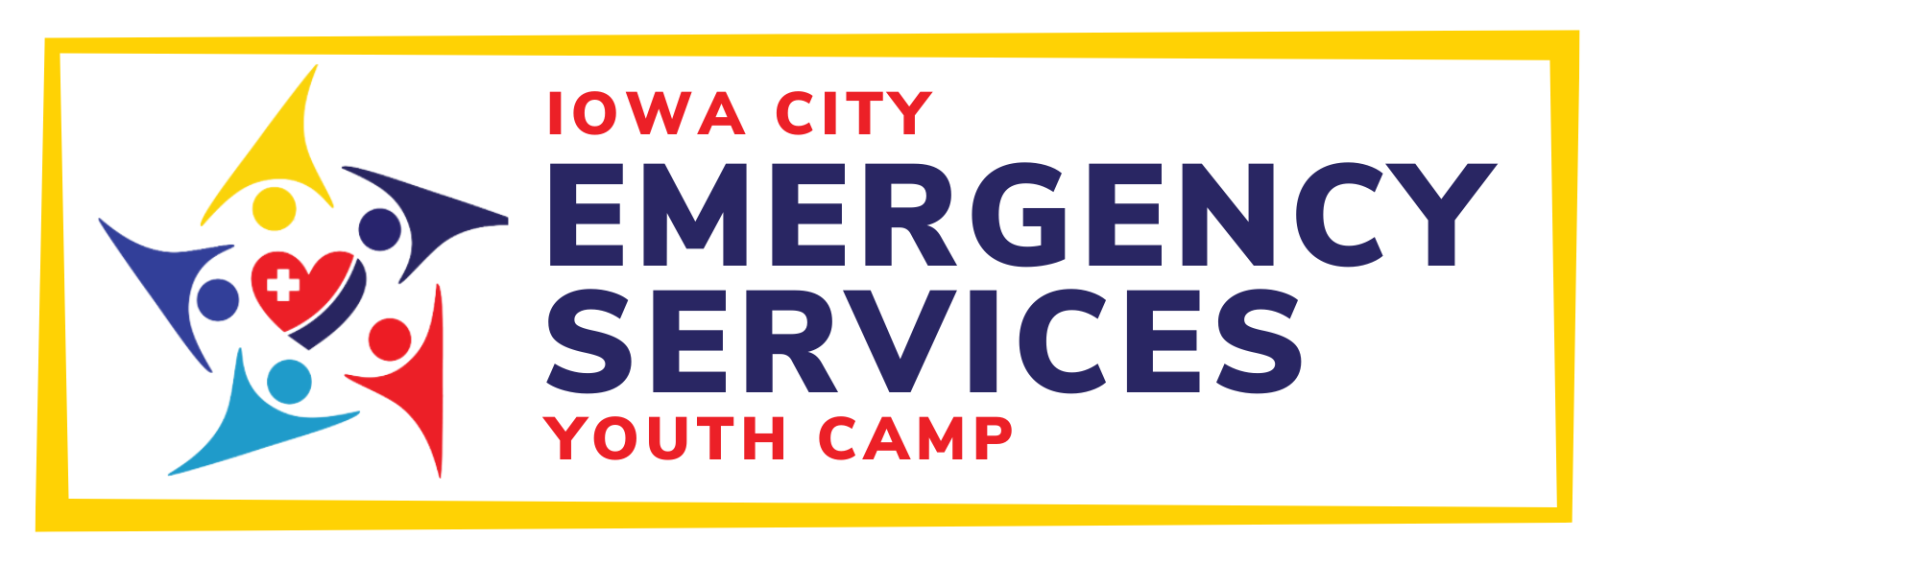 Emergency Services Youth Camp 